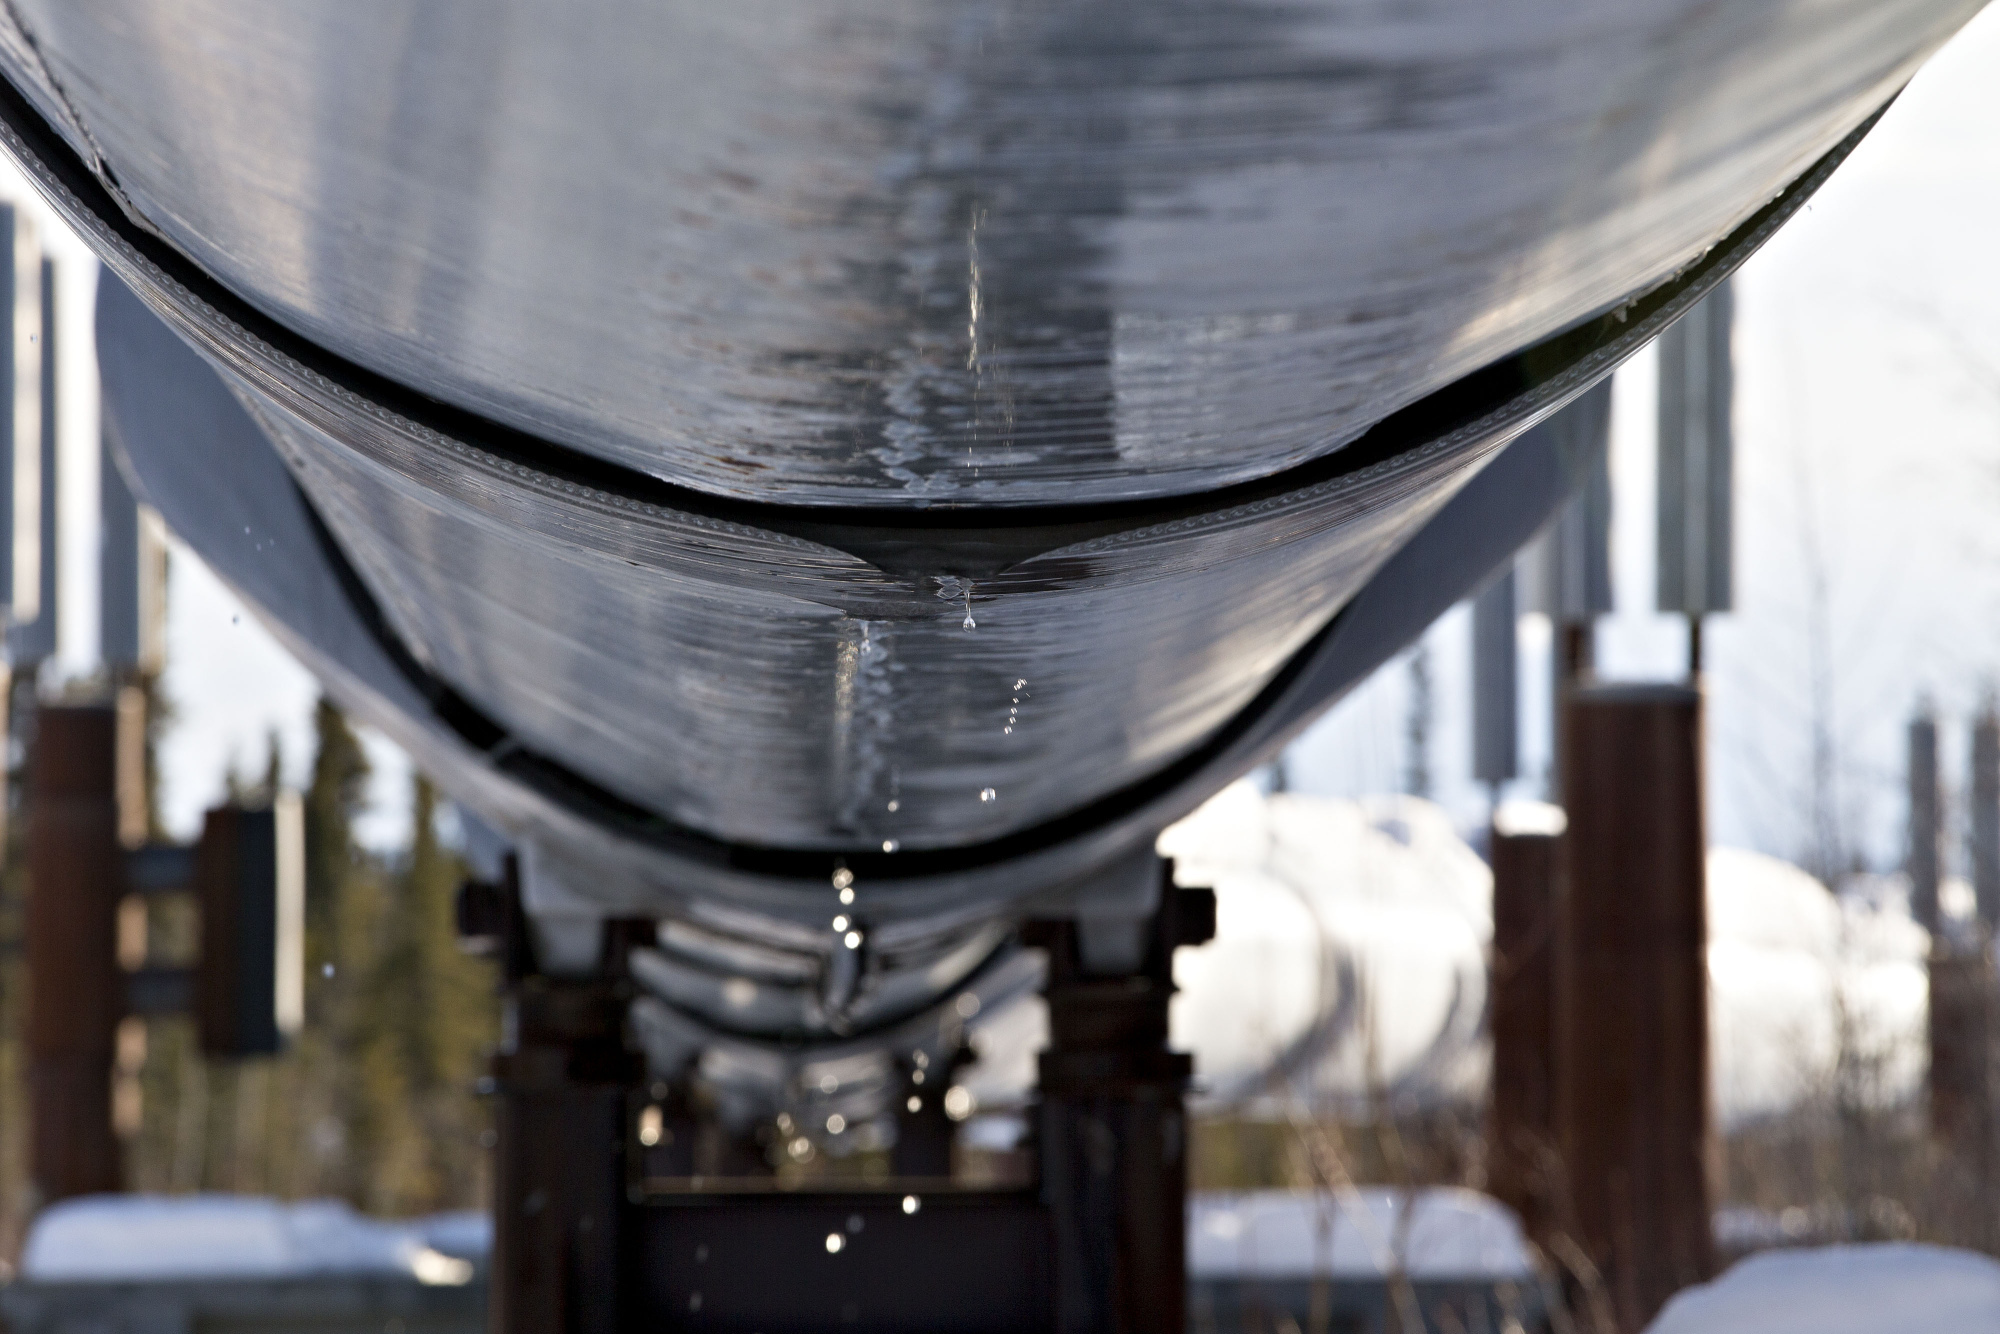 Melting snow drips from the bottom of the Trans Alaska Pipeline System (TAPS) in Glennallen, Alaska, U.S., on Tuesday, Feb. 14, 2017. Four decades after the Trans Alaska Pipeline System went live, transforming the North Slope into a modern-day Klondike, many Alaskans fear the best days have passed. Photographer: Daniel Acker/Bloomberg